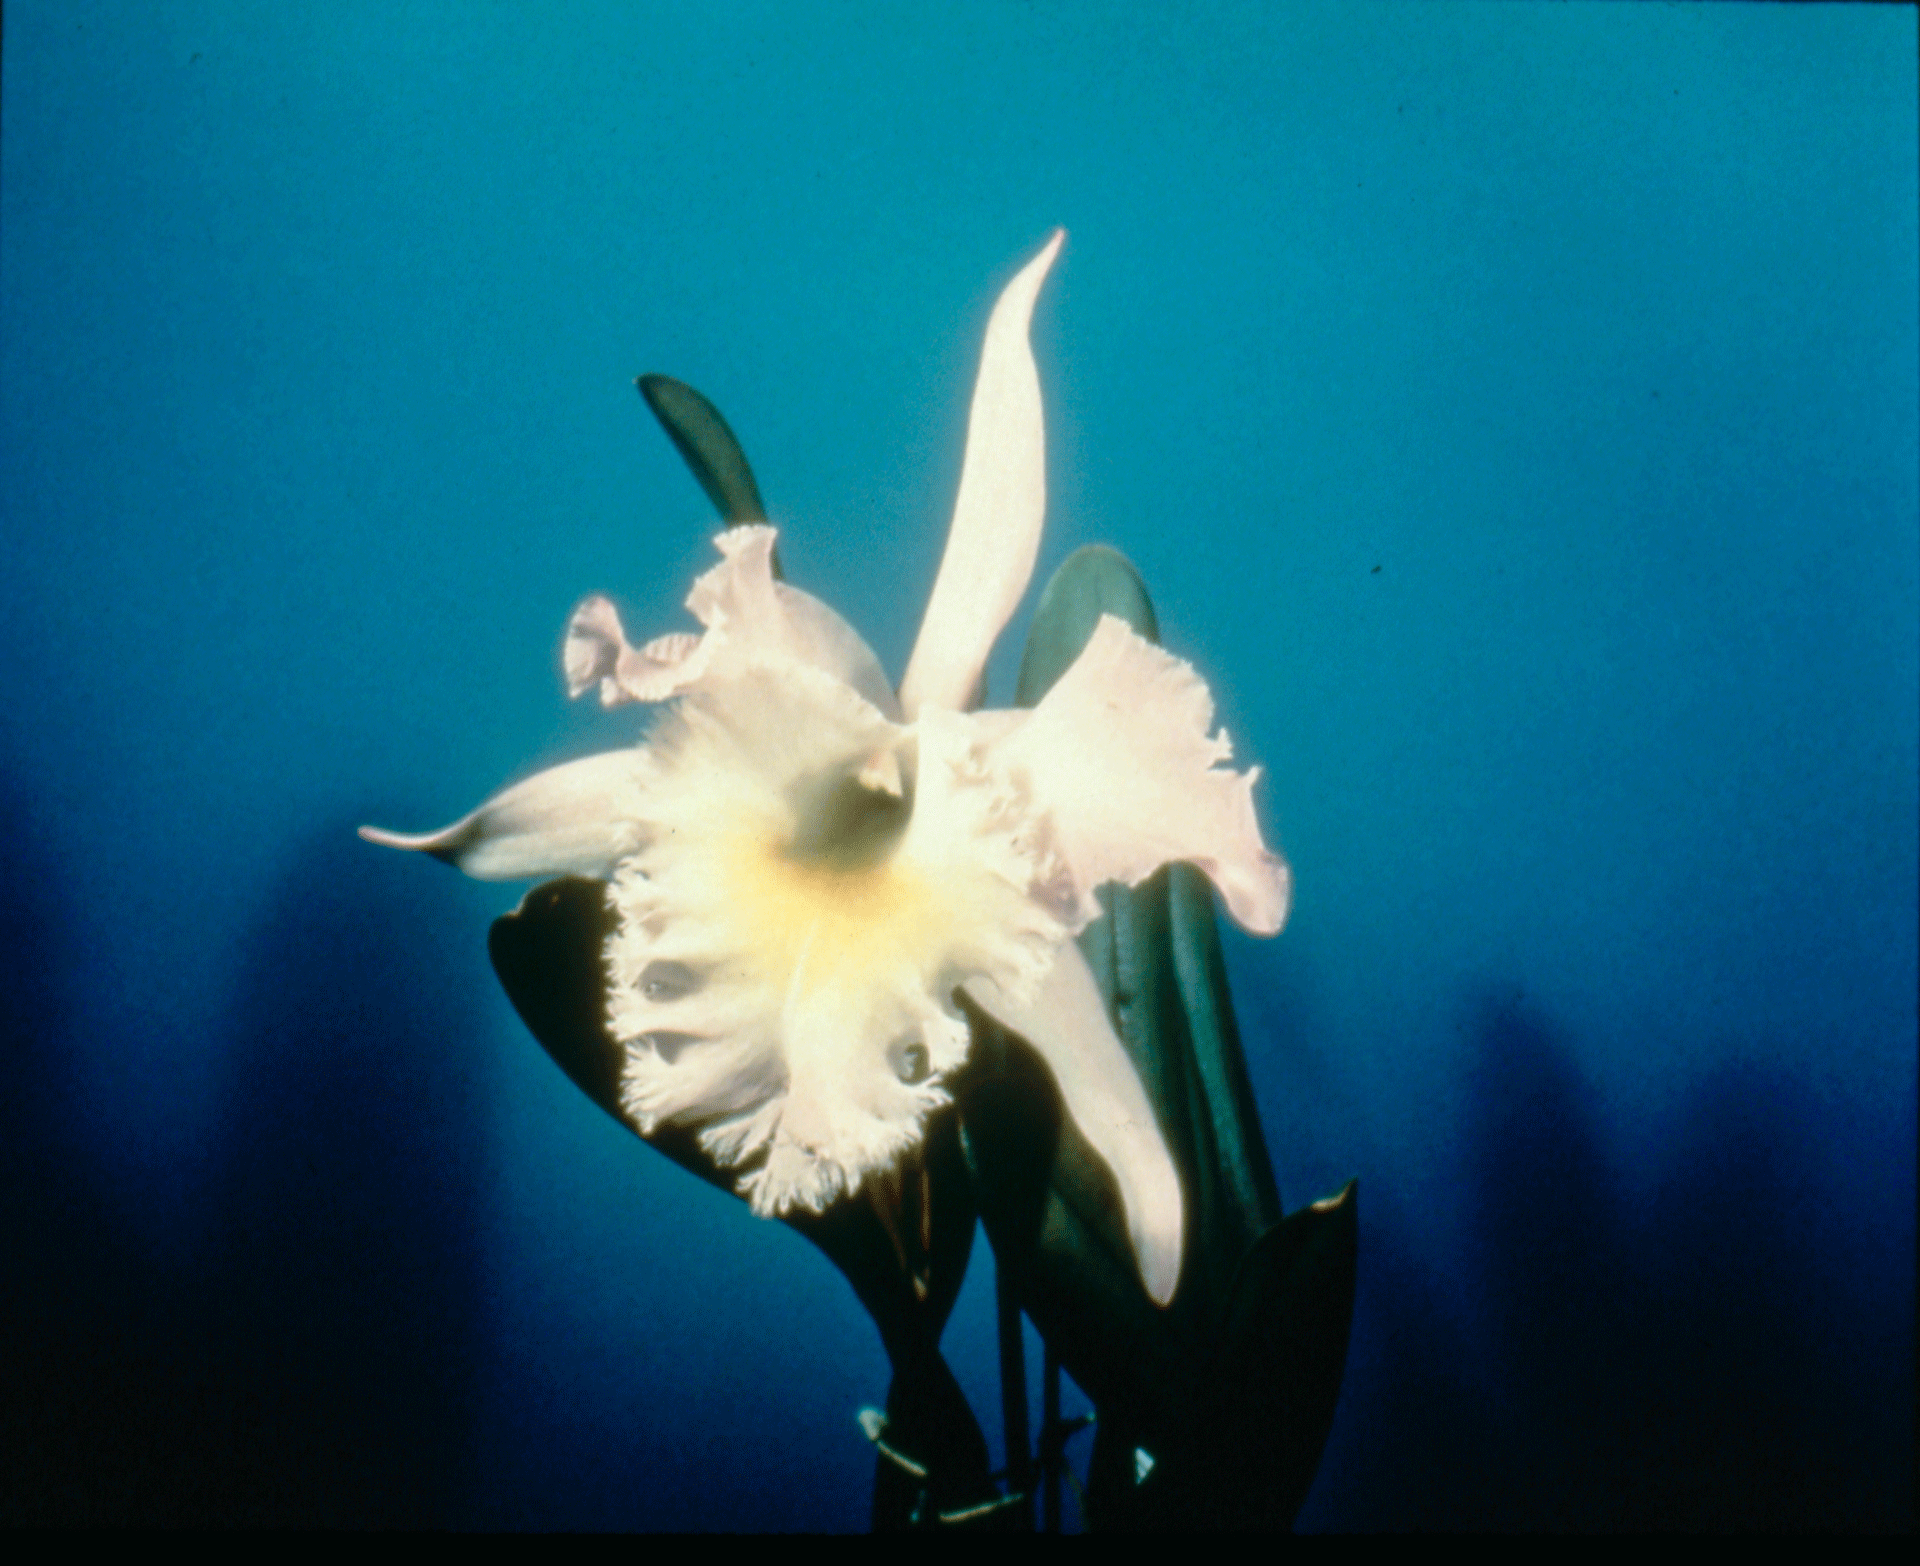 A photograph by Sherrie Levine titled, Gottscho-Schleisner Orchids: 1-10, dated 1964 to 1997.